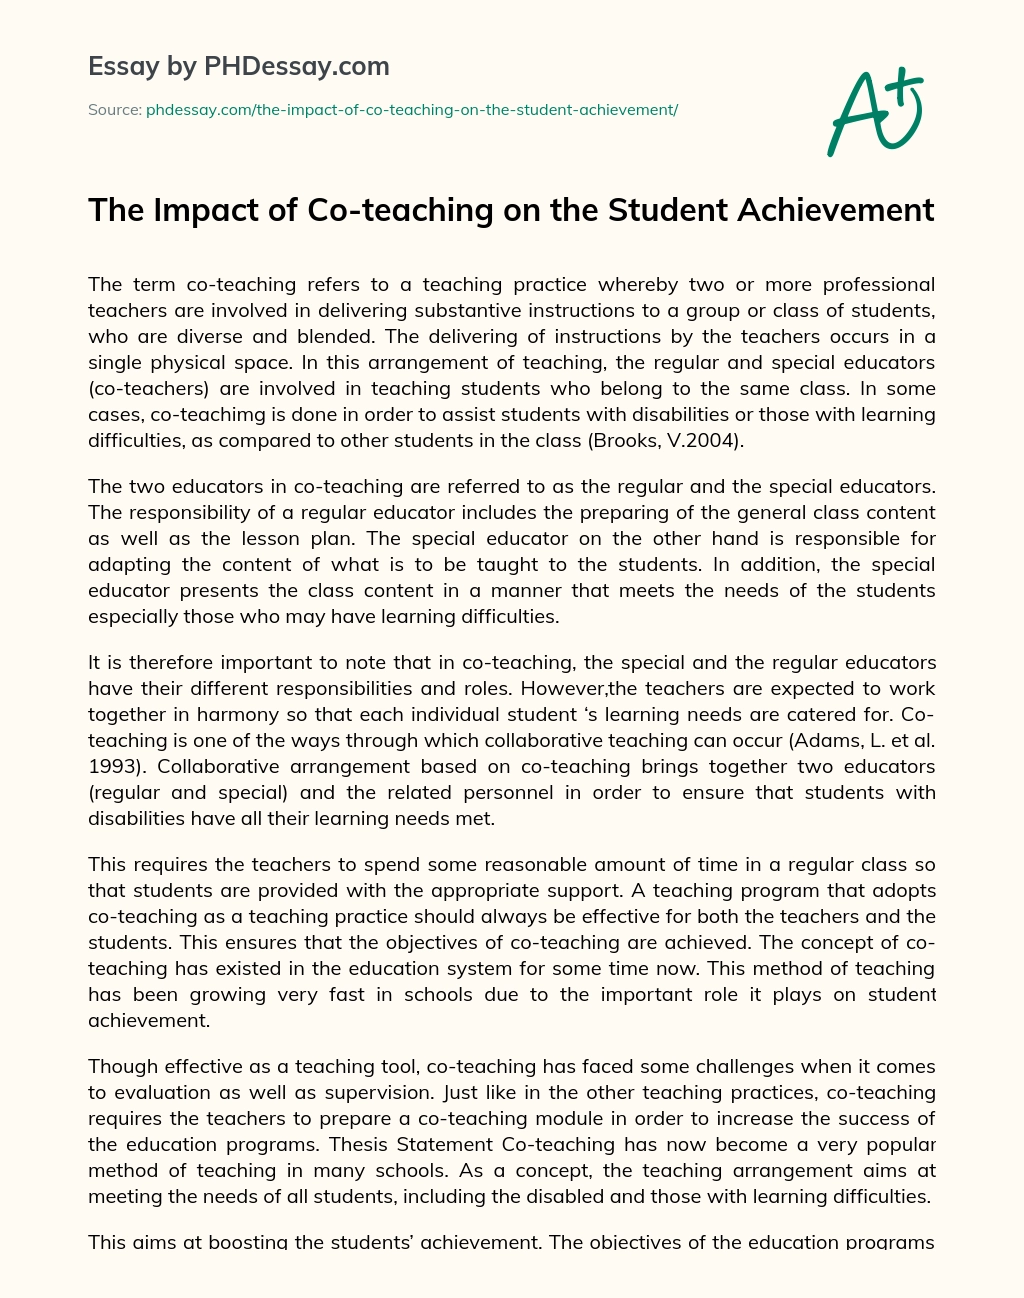 The Impact of Co-teaching on the Student Achievement essay